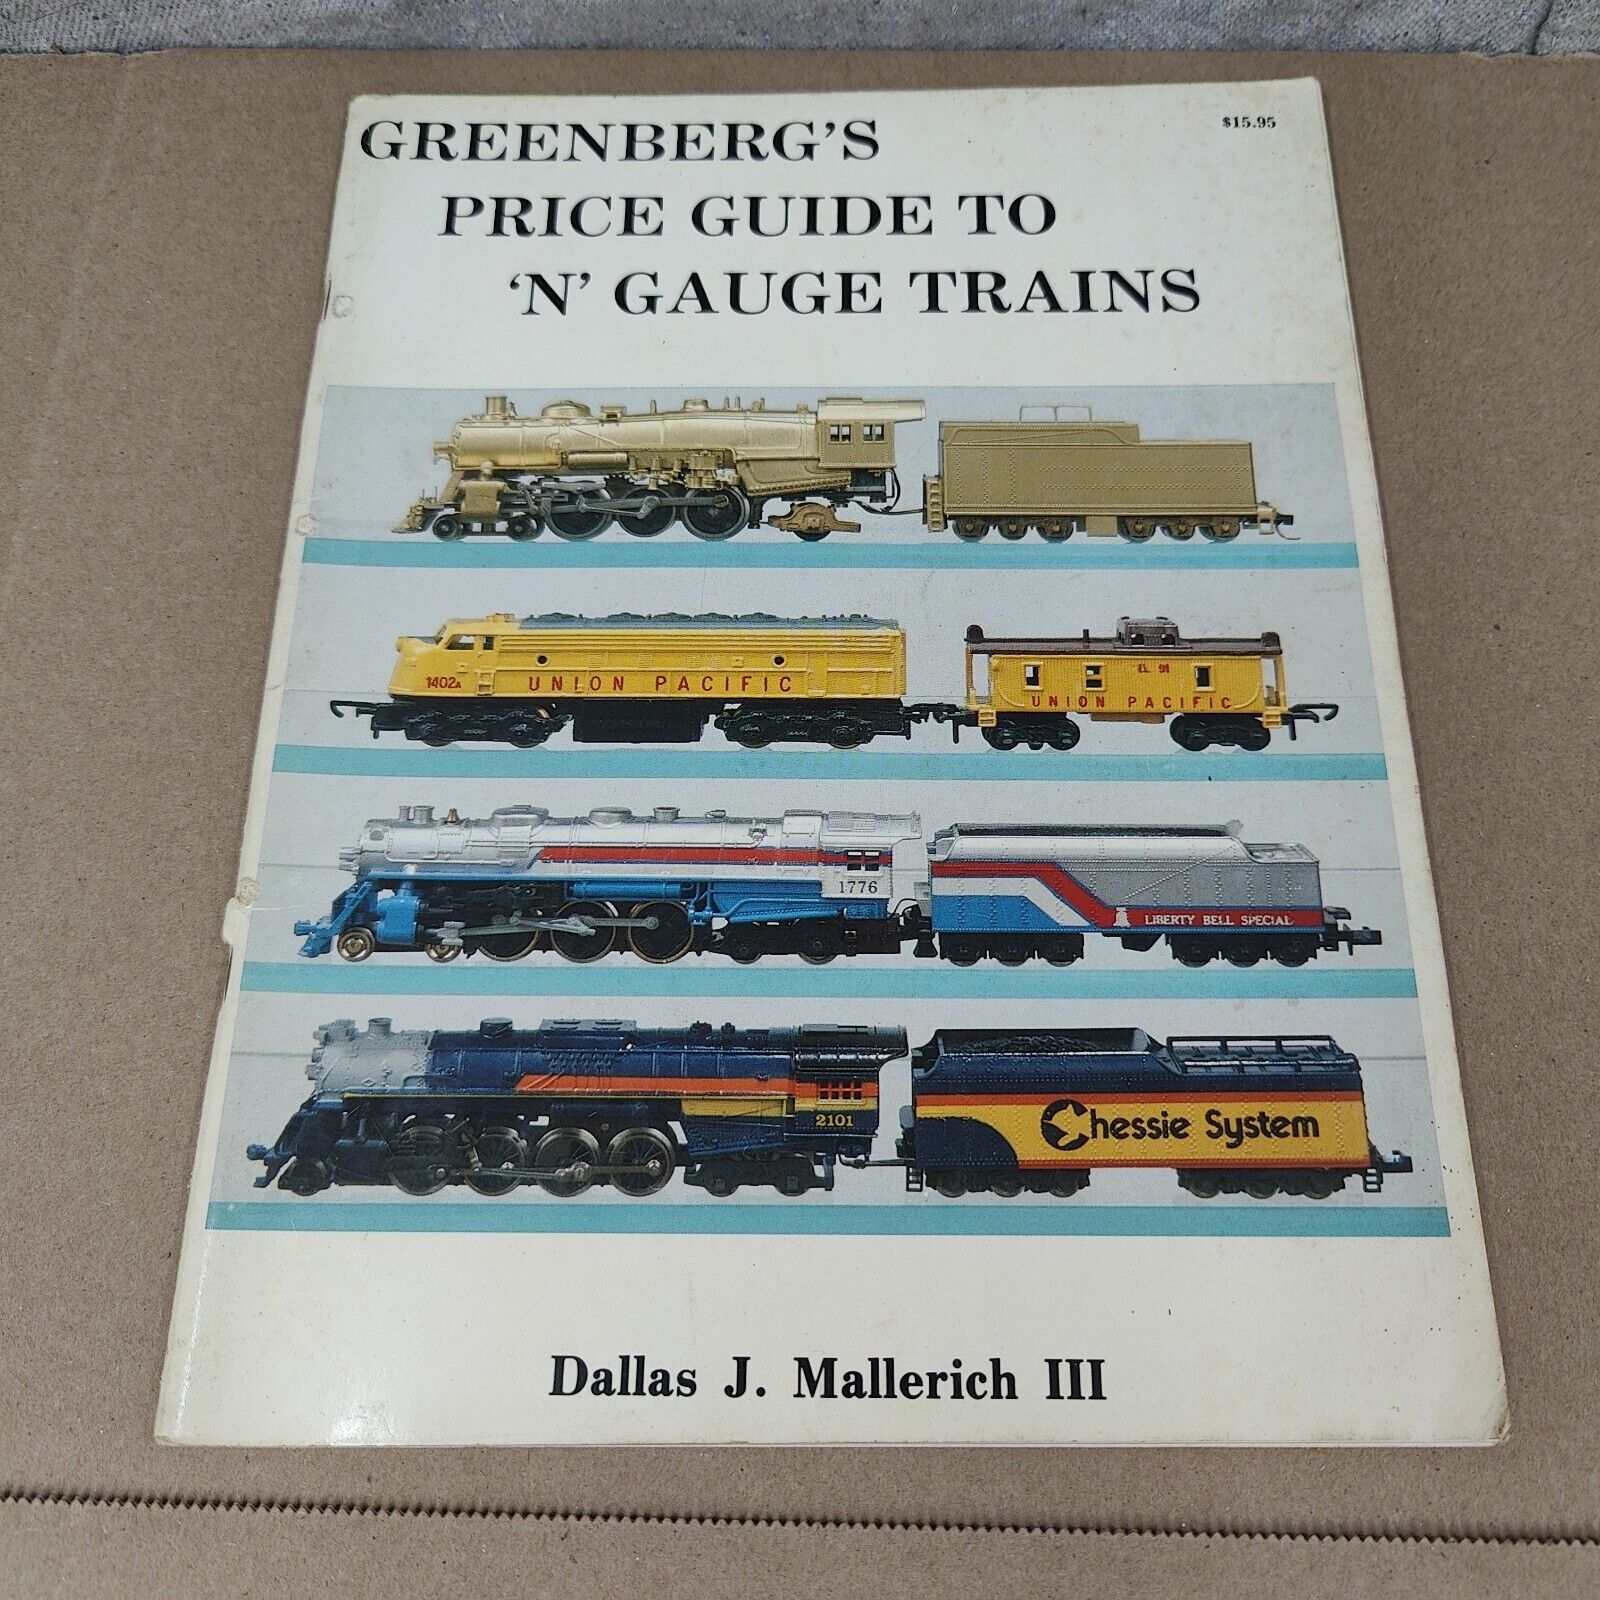 Greenberg's Price Guide To Engage Trains By Dallas J Mallerick III First Edition